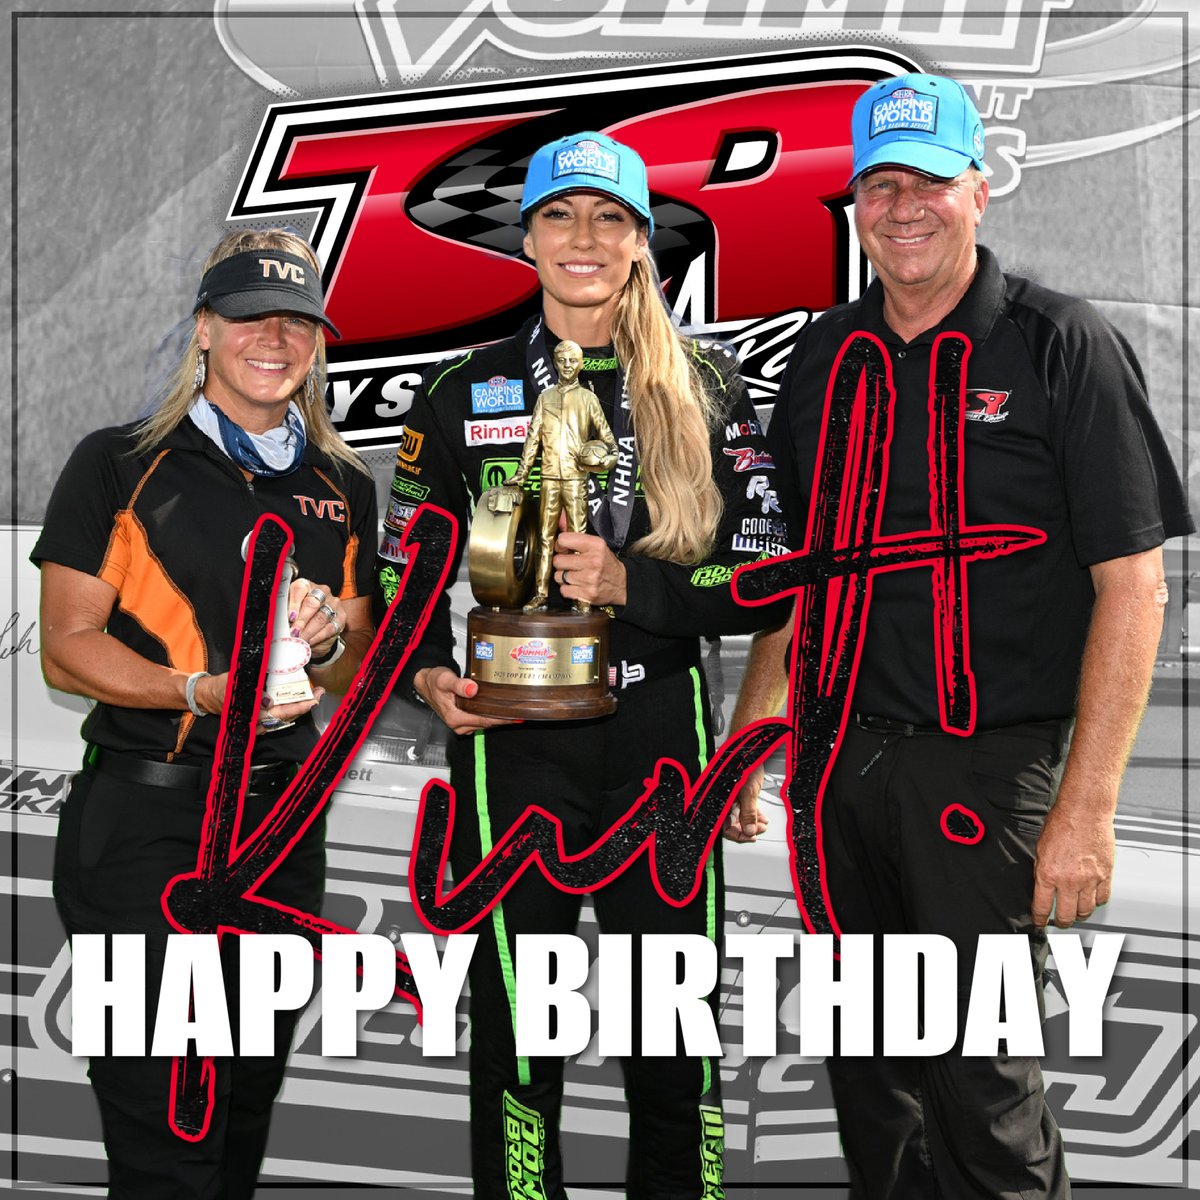 Join us in wishing Kurt a very happy birthday! He's our rockstar Track Specialist and member of #TeamGSD. #TSRnitro | #NHRA | #OneTeamAllTeam